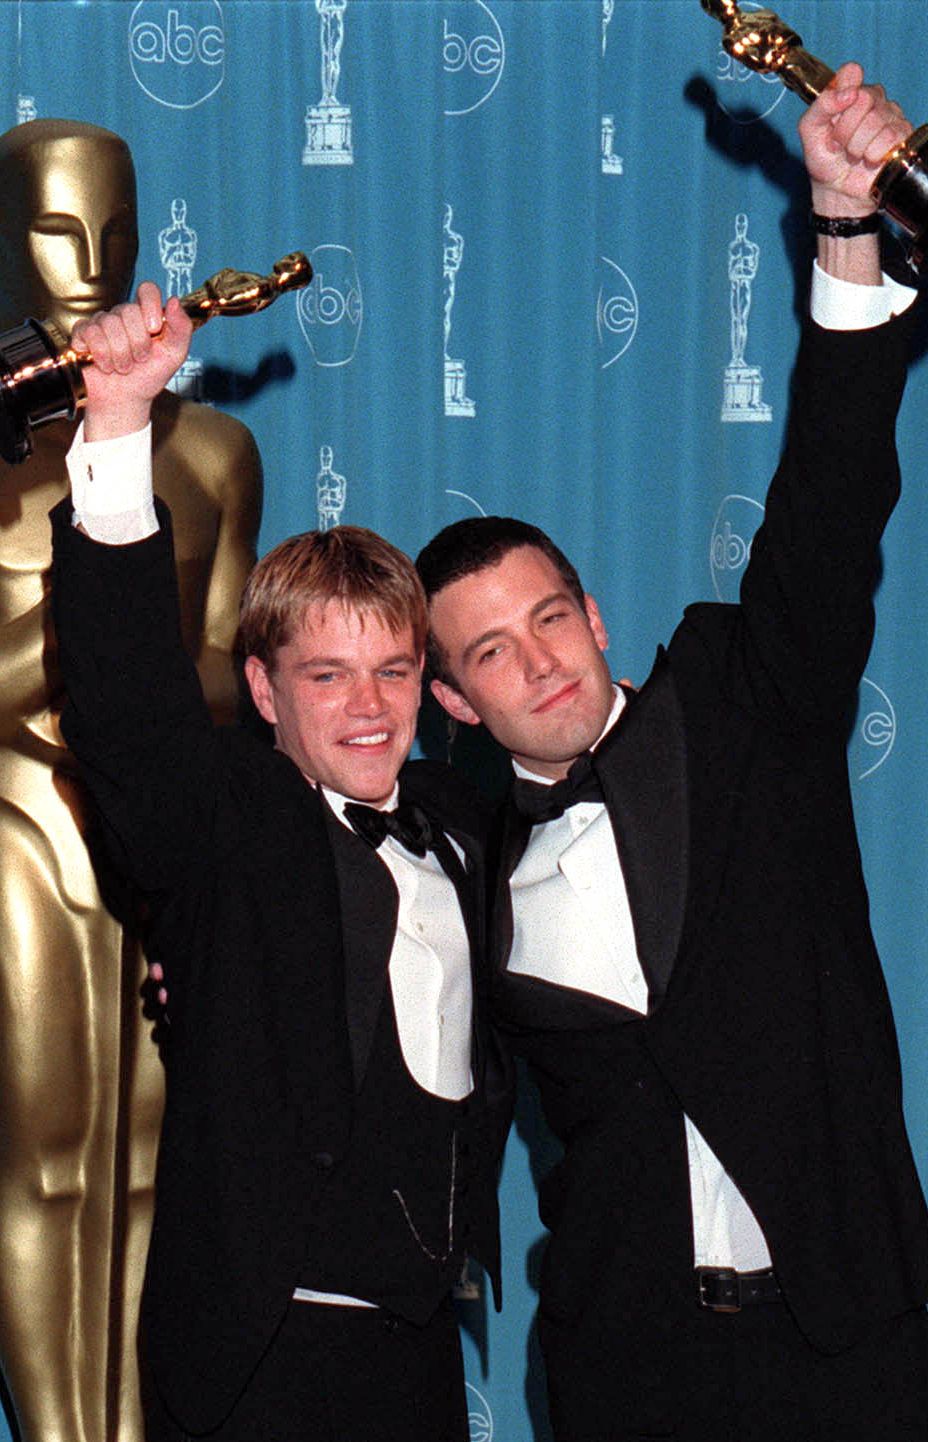 Matt Damon and Ben Affleck at the 1998 Oscars, where they won Best Original Screenplay for Good Will Hunting